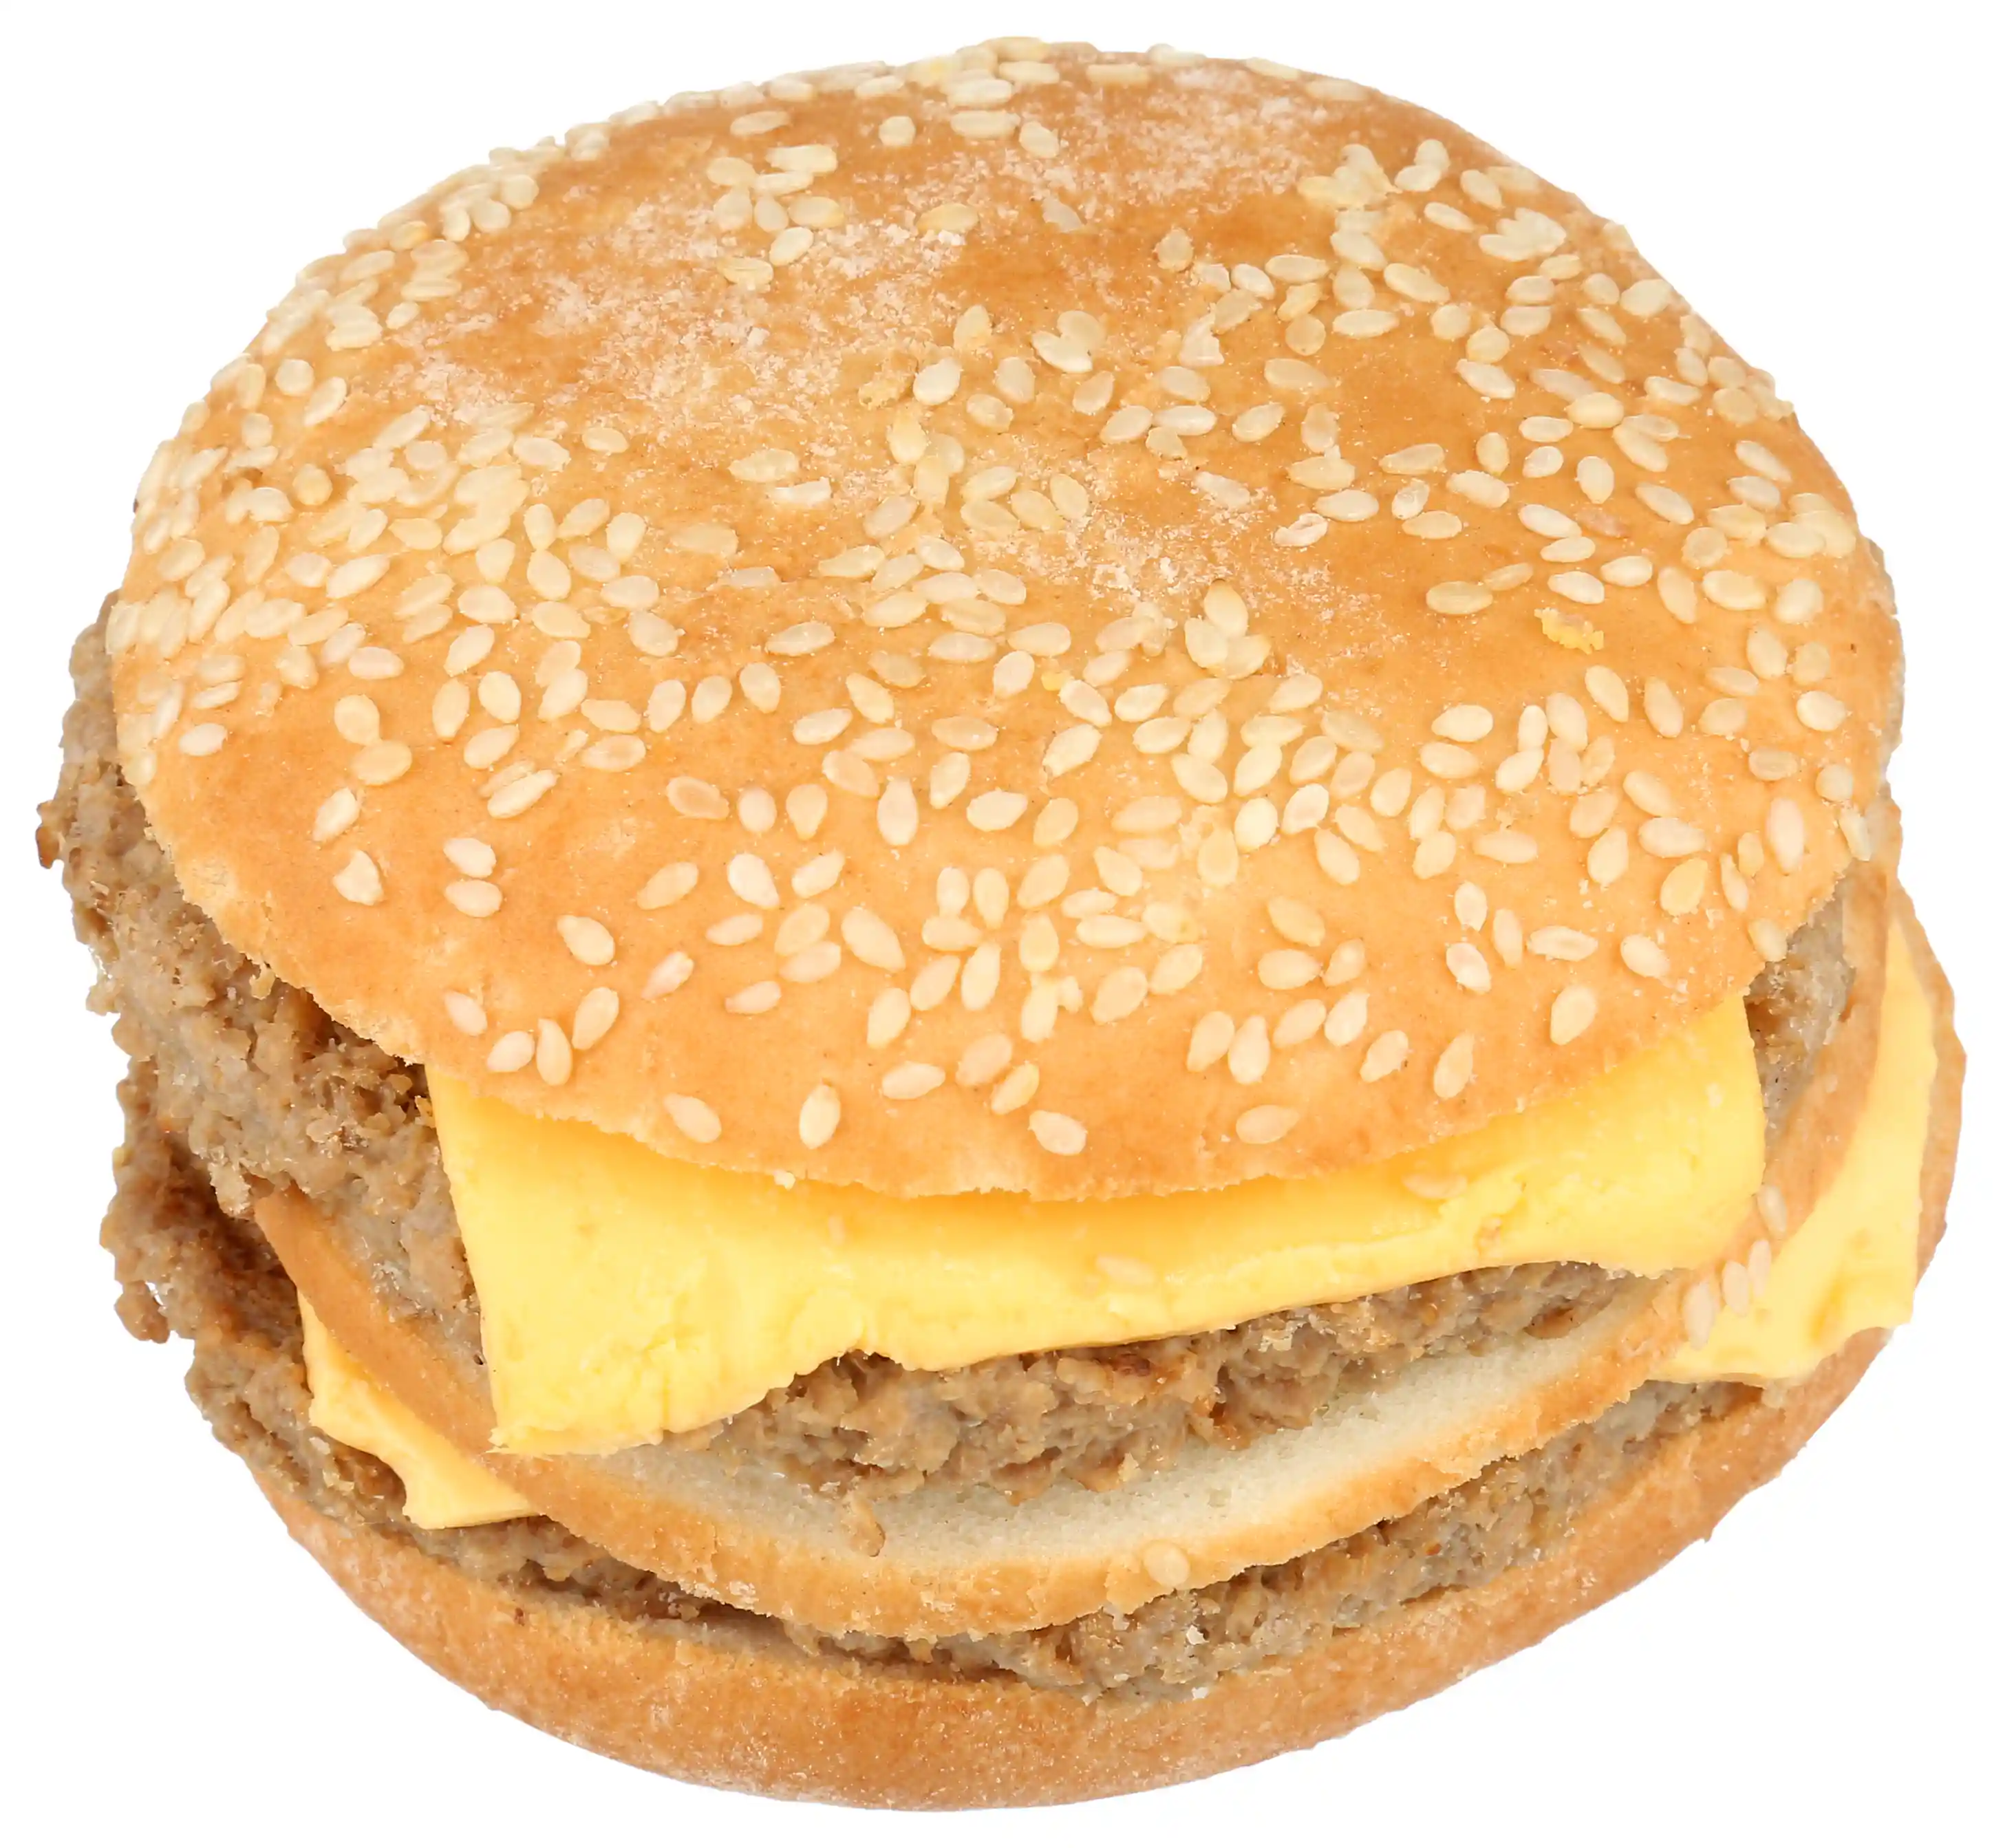 Fast Choice® Double Beef Stacker With Cheesehttps://images.salsify.com/image/upload/s--jv_5R1Bz--/q_25/mszlwsbyxvdakh3nowl4.webp